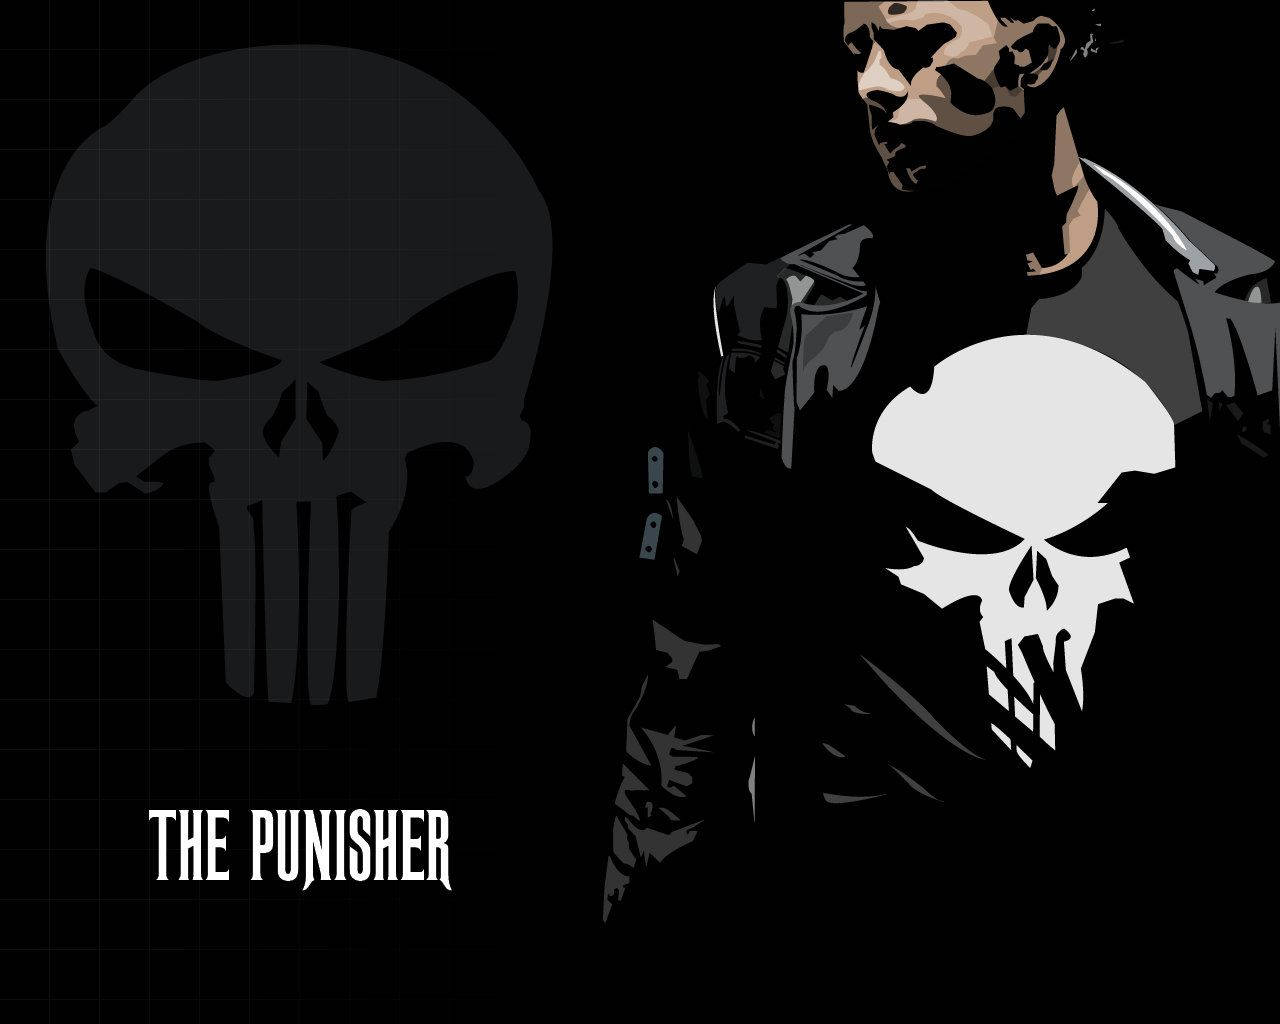 The Punisher Logo And Frank Castle Wallpaper